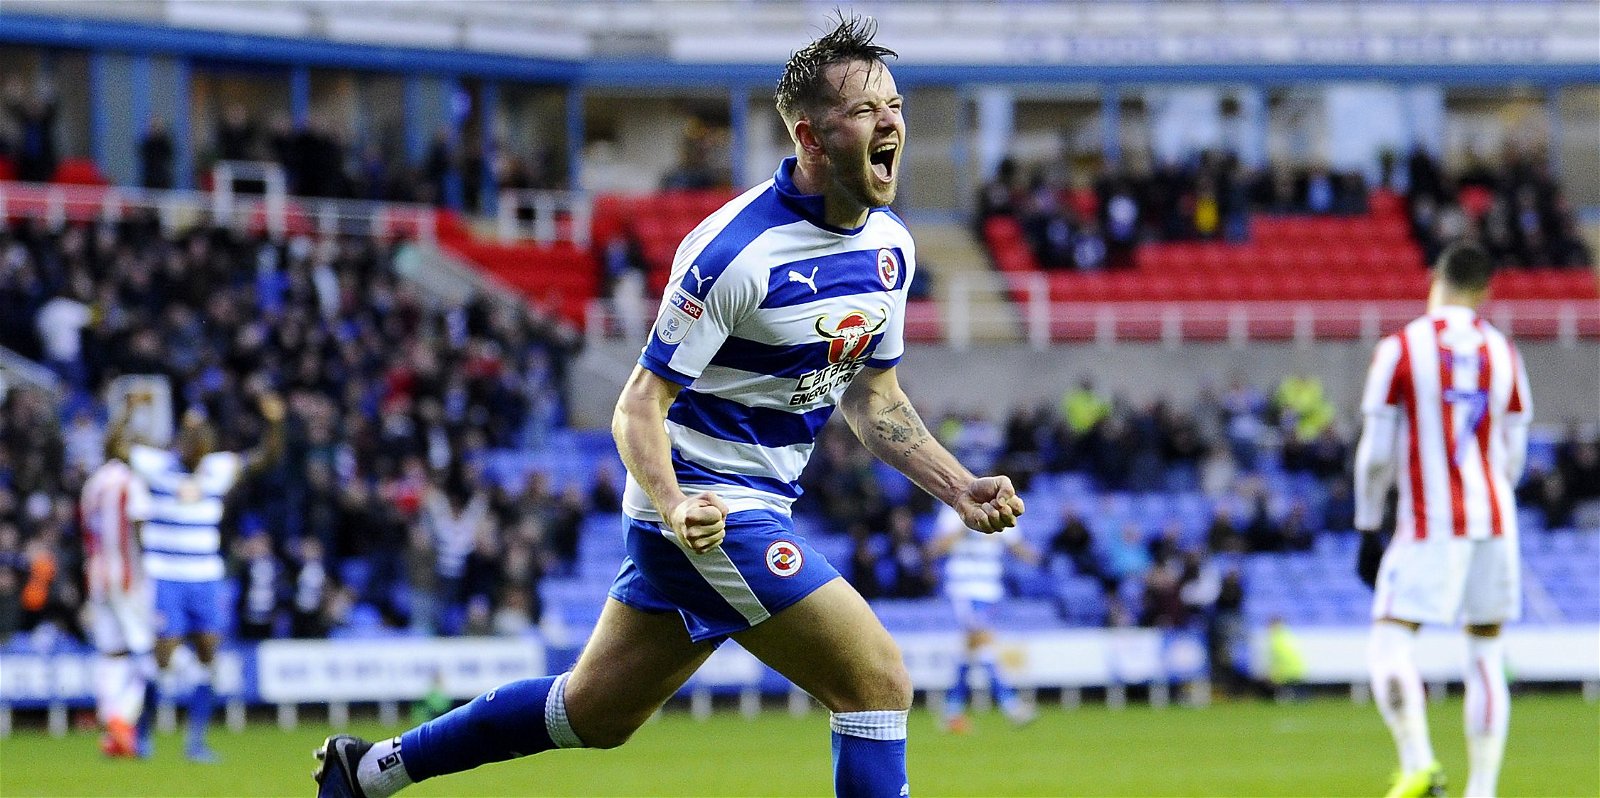 Reading, Reading international striker told he can leave the club this summer